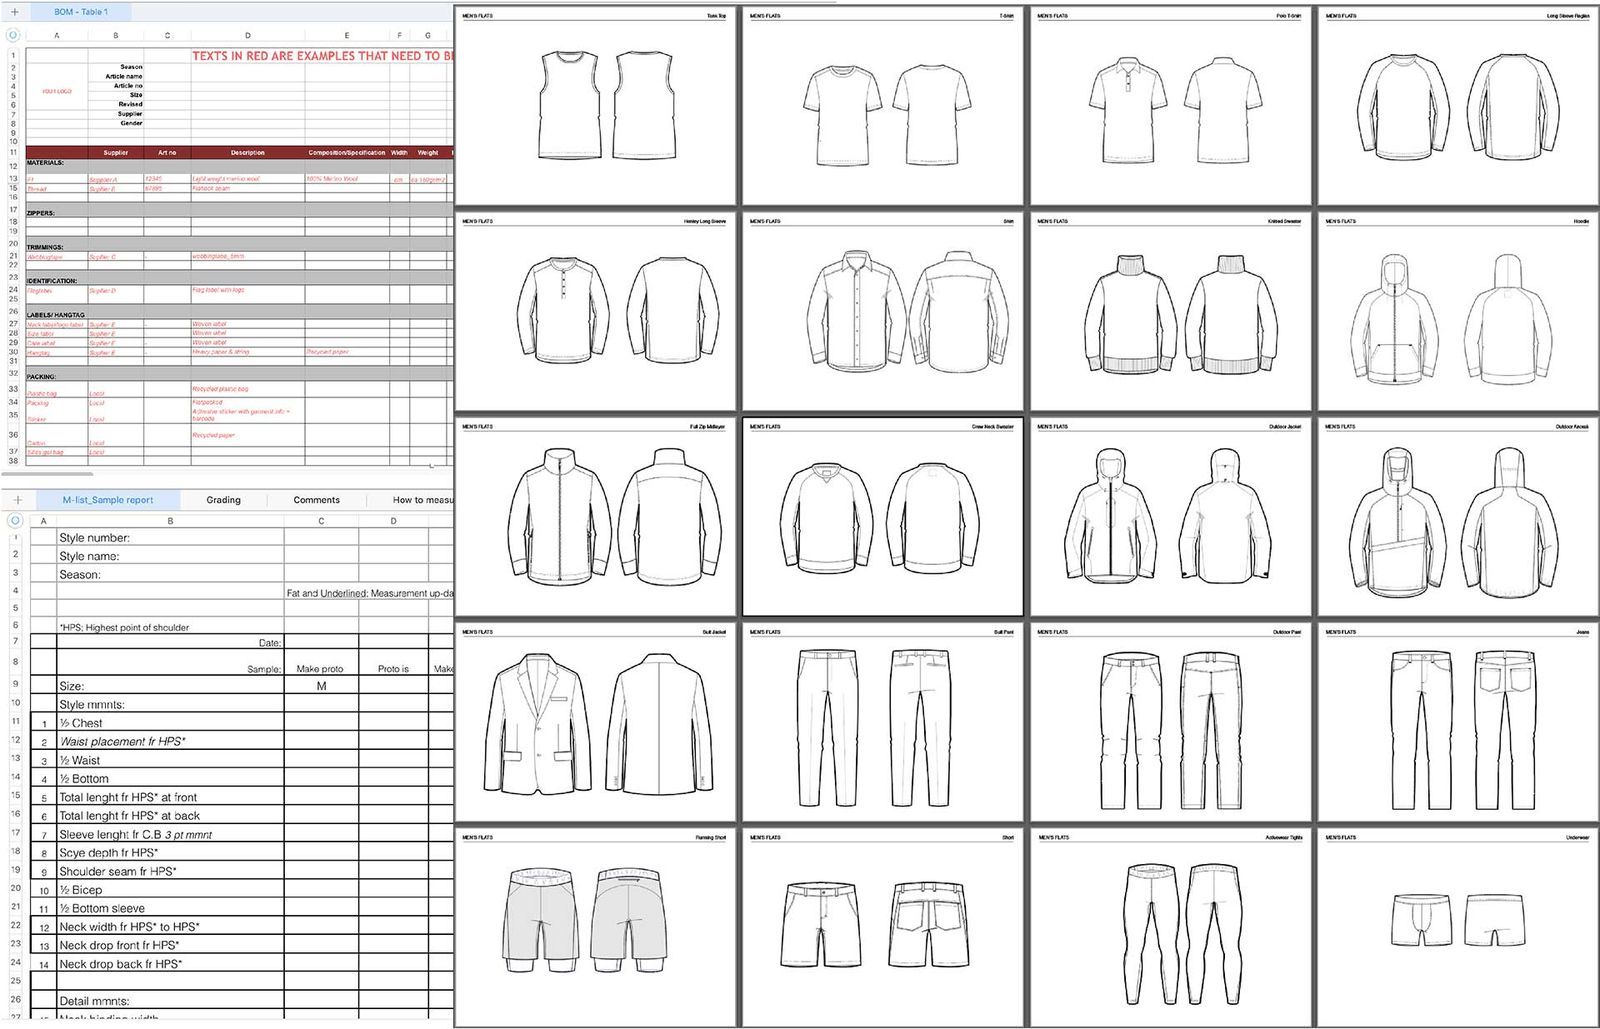 Garment collection developed using CAD (above) and developed